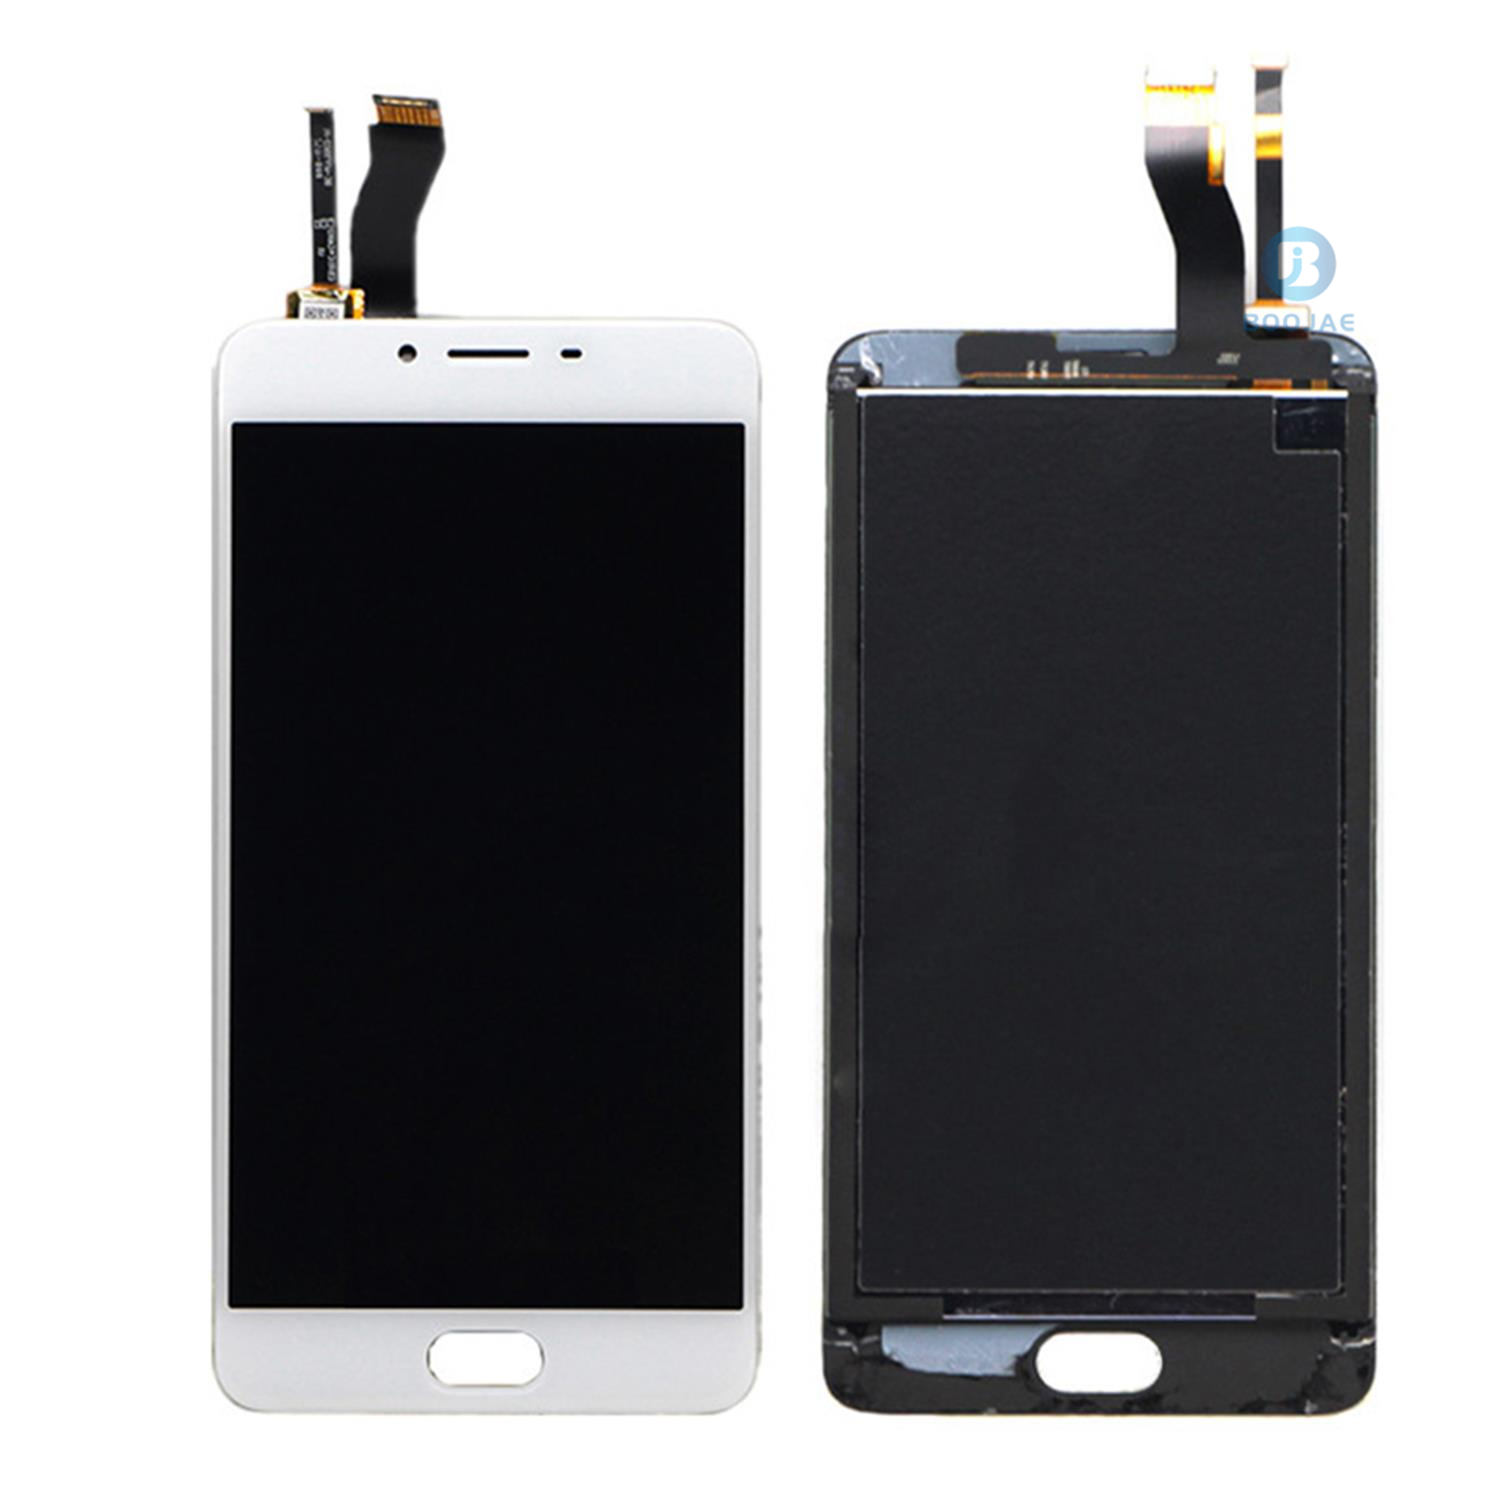 Meizu Meilan Note 5 LCD Screen Display, Lcd Assembly Replacement